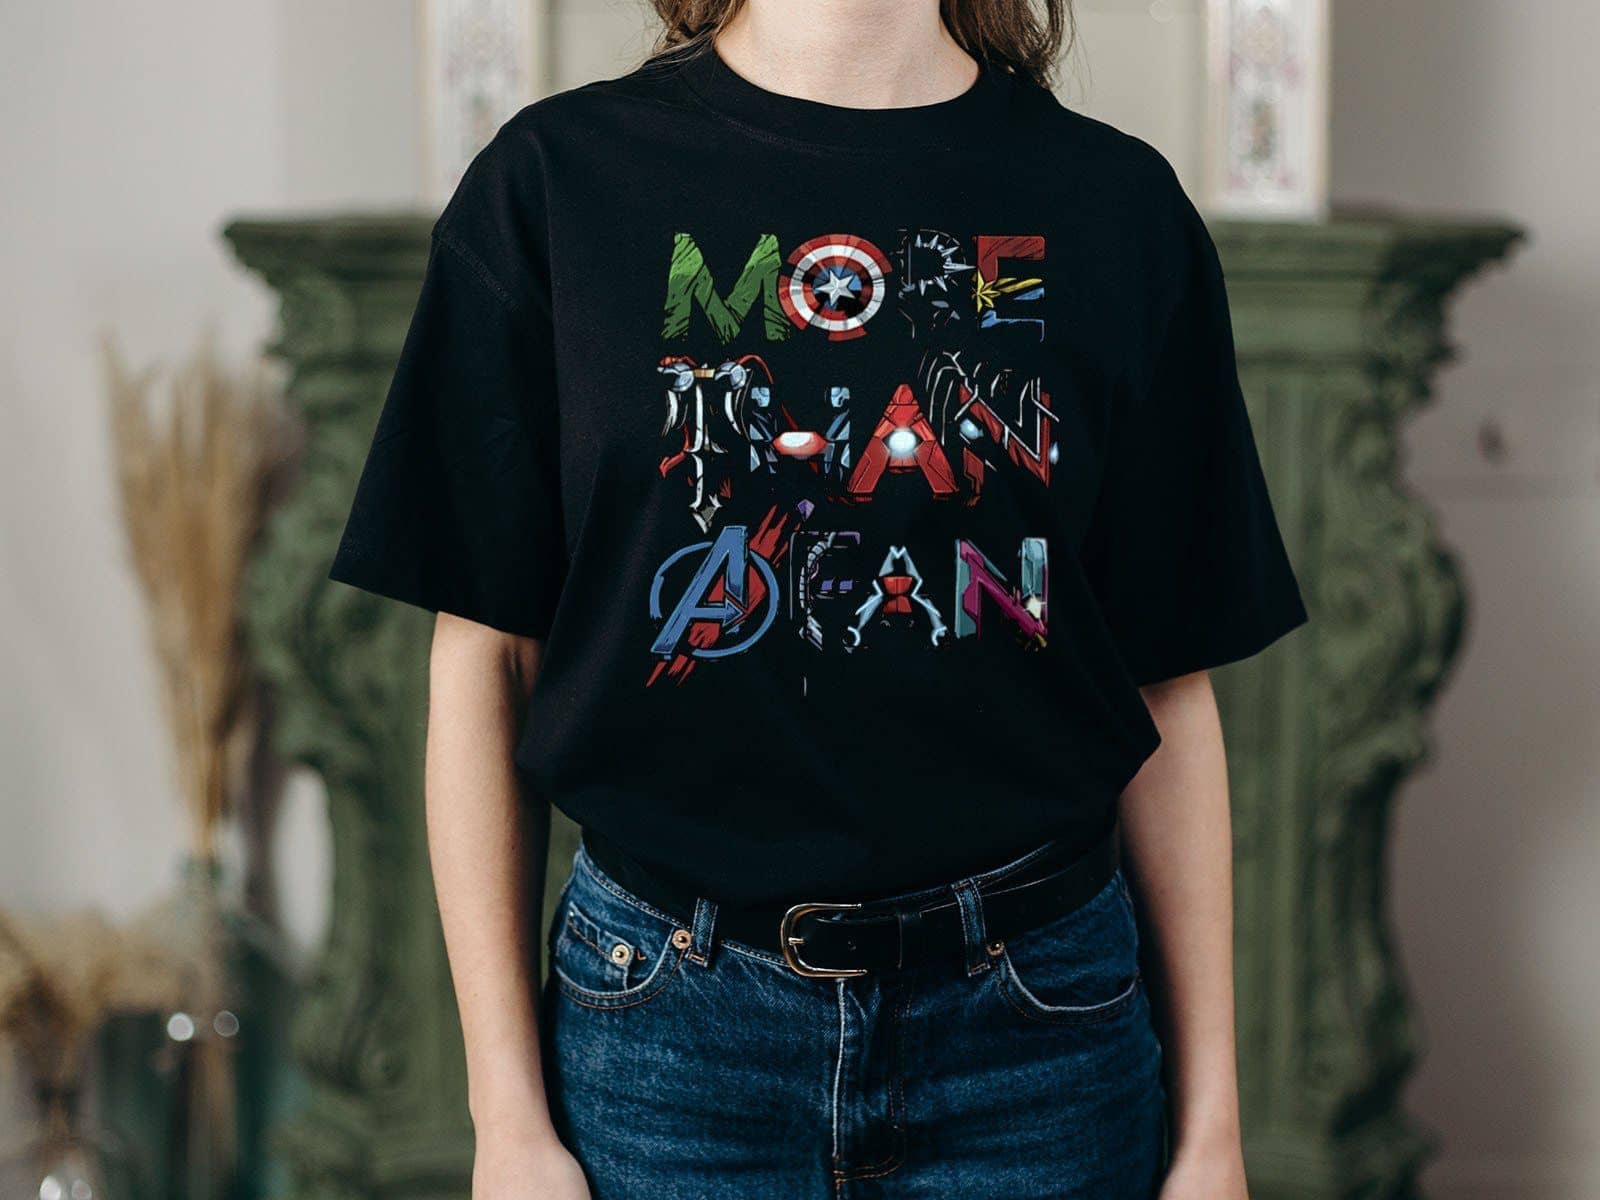 All Original Avengers Fan Than - T for Women Exclusive freeshipping Catch Black Drift and India More Men A Shirt My